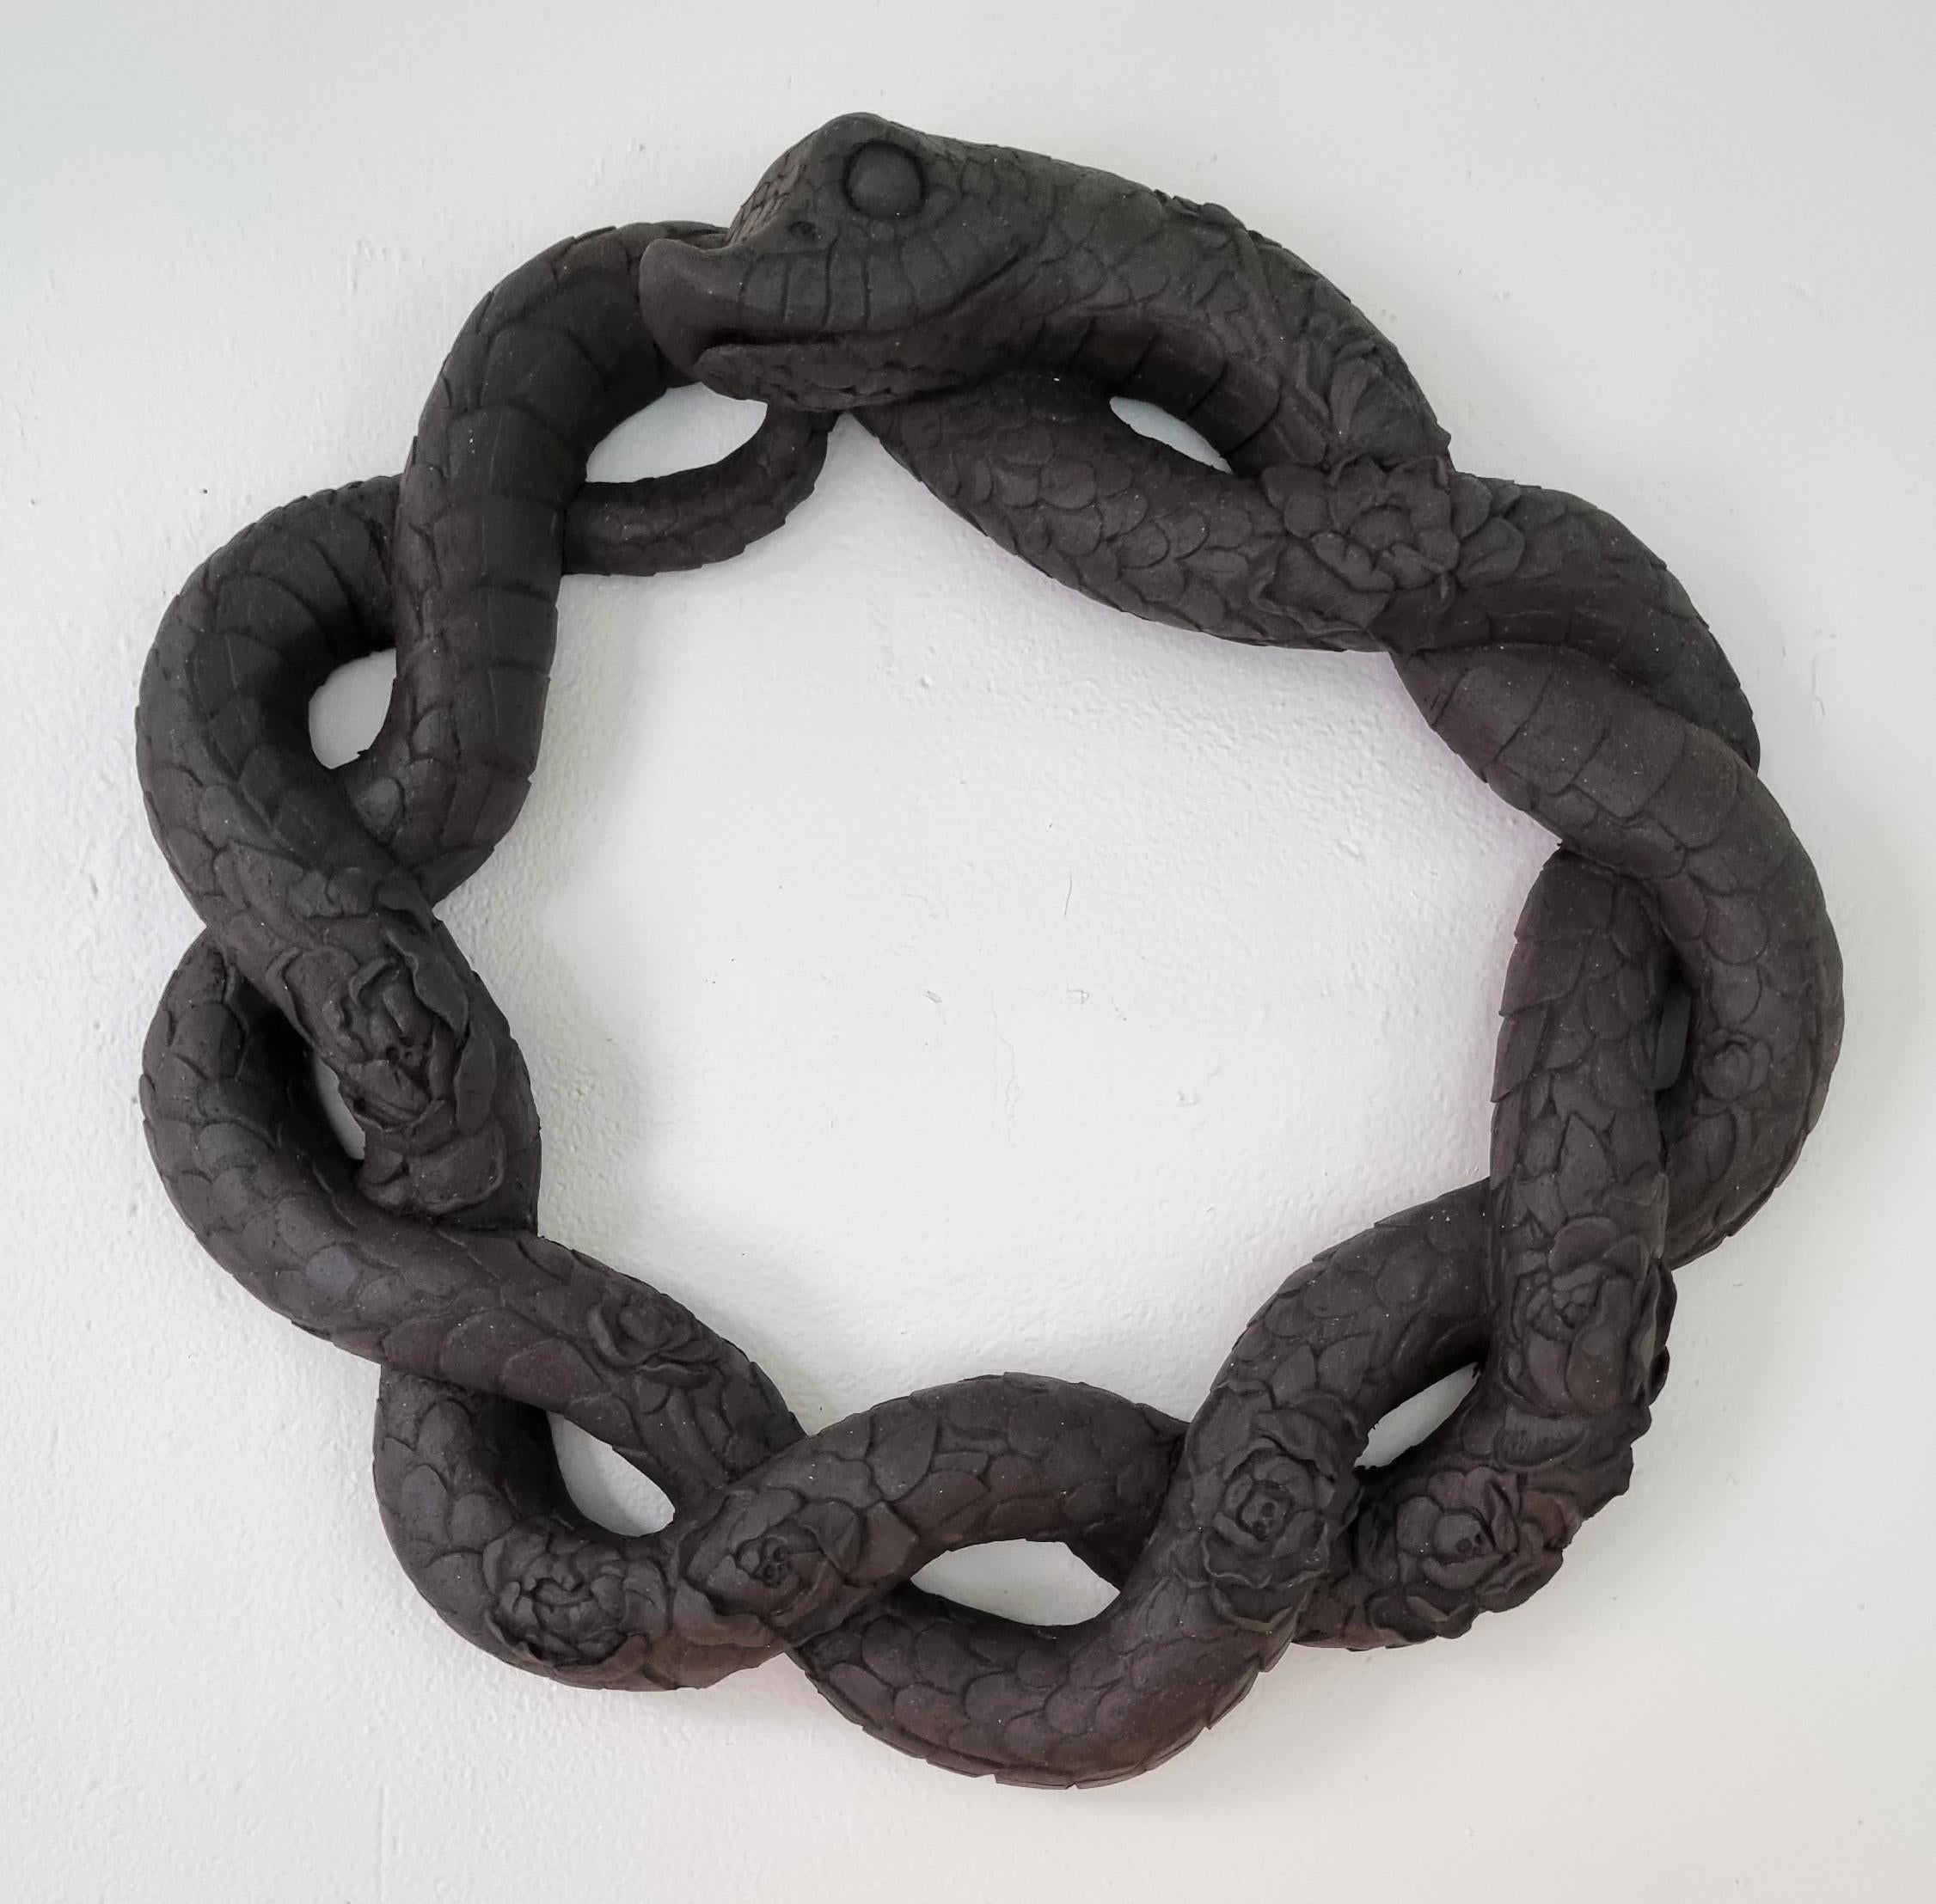 Amy Young Figurative Sculpture - Black Serpent (MADE TO ORDER)